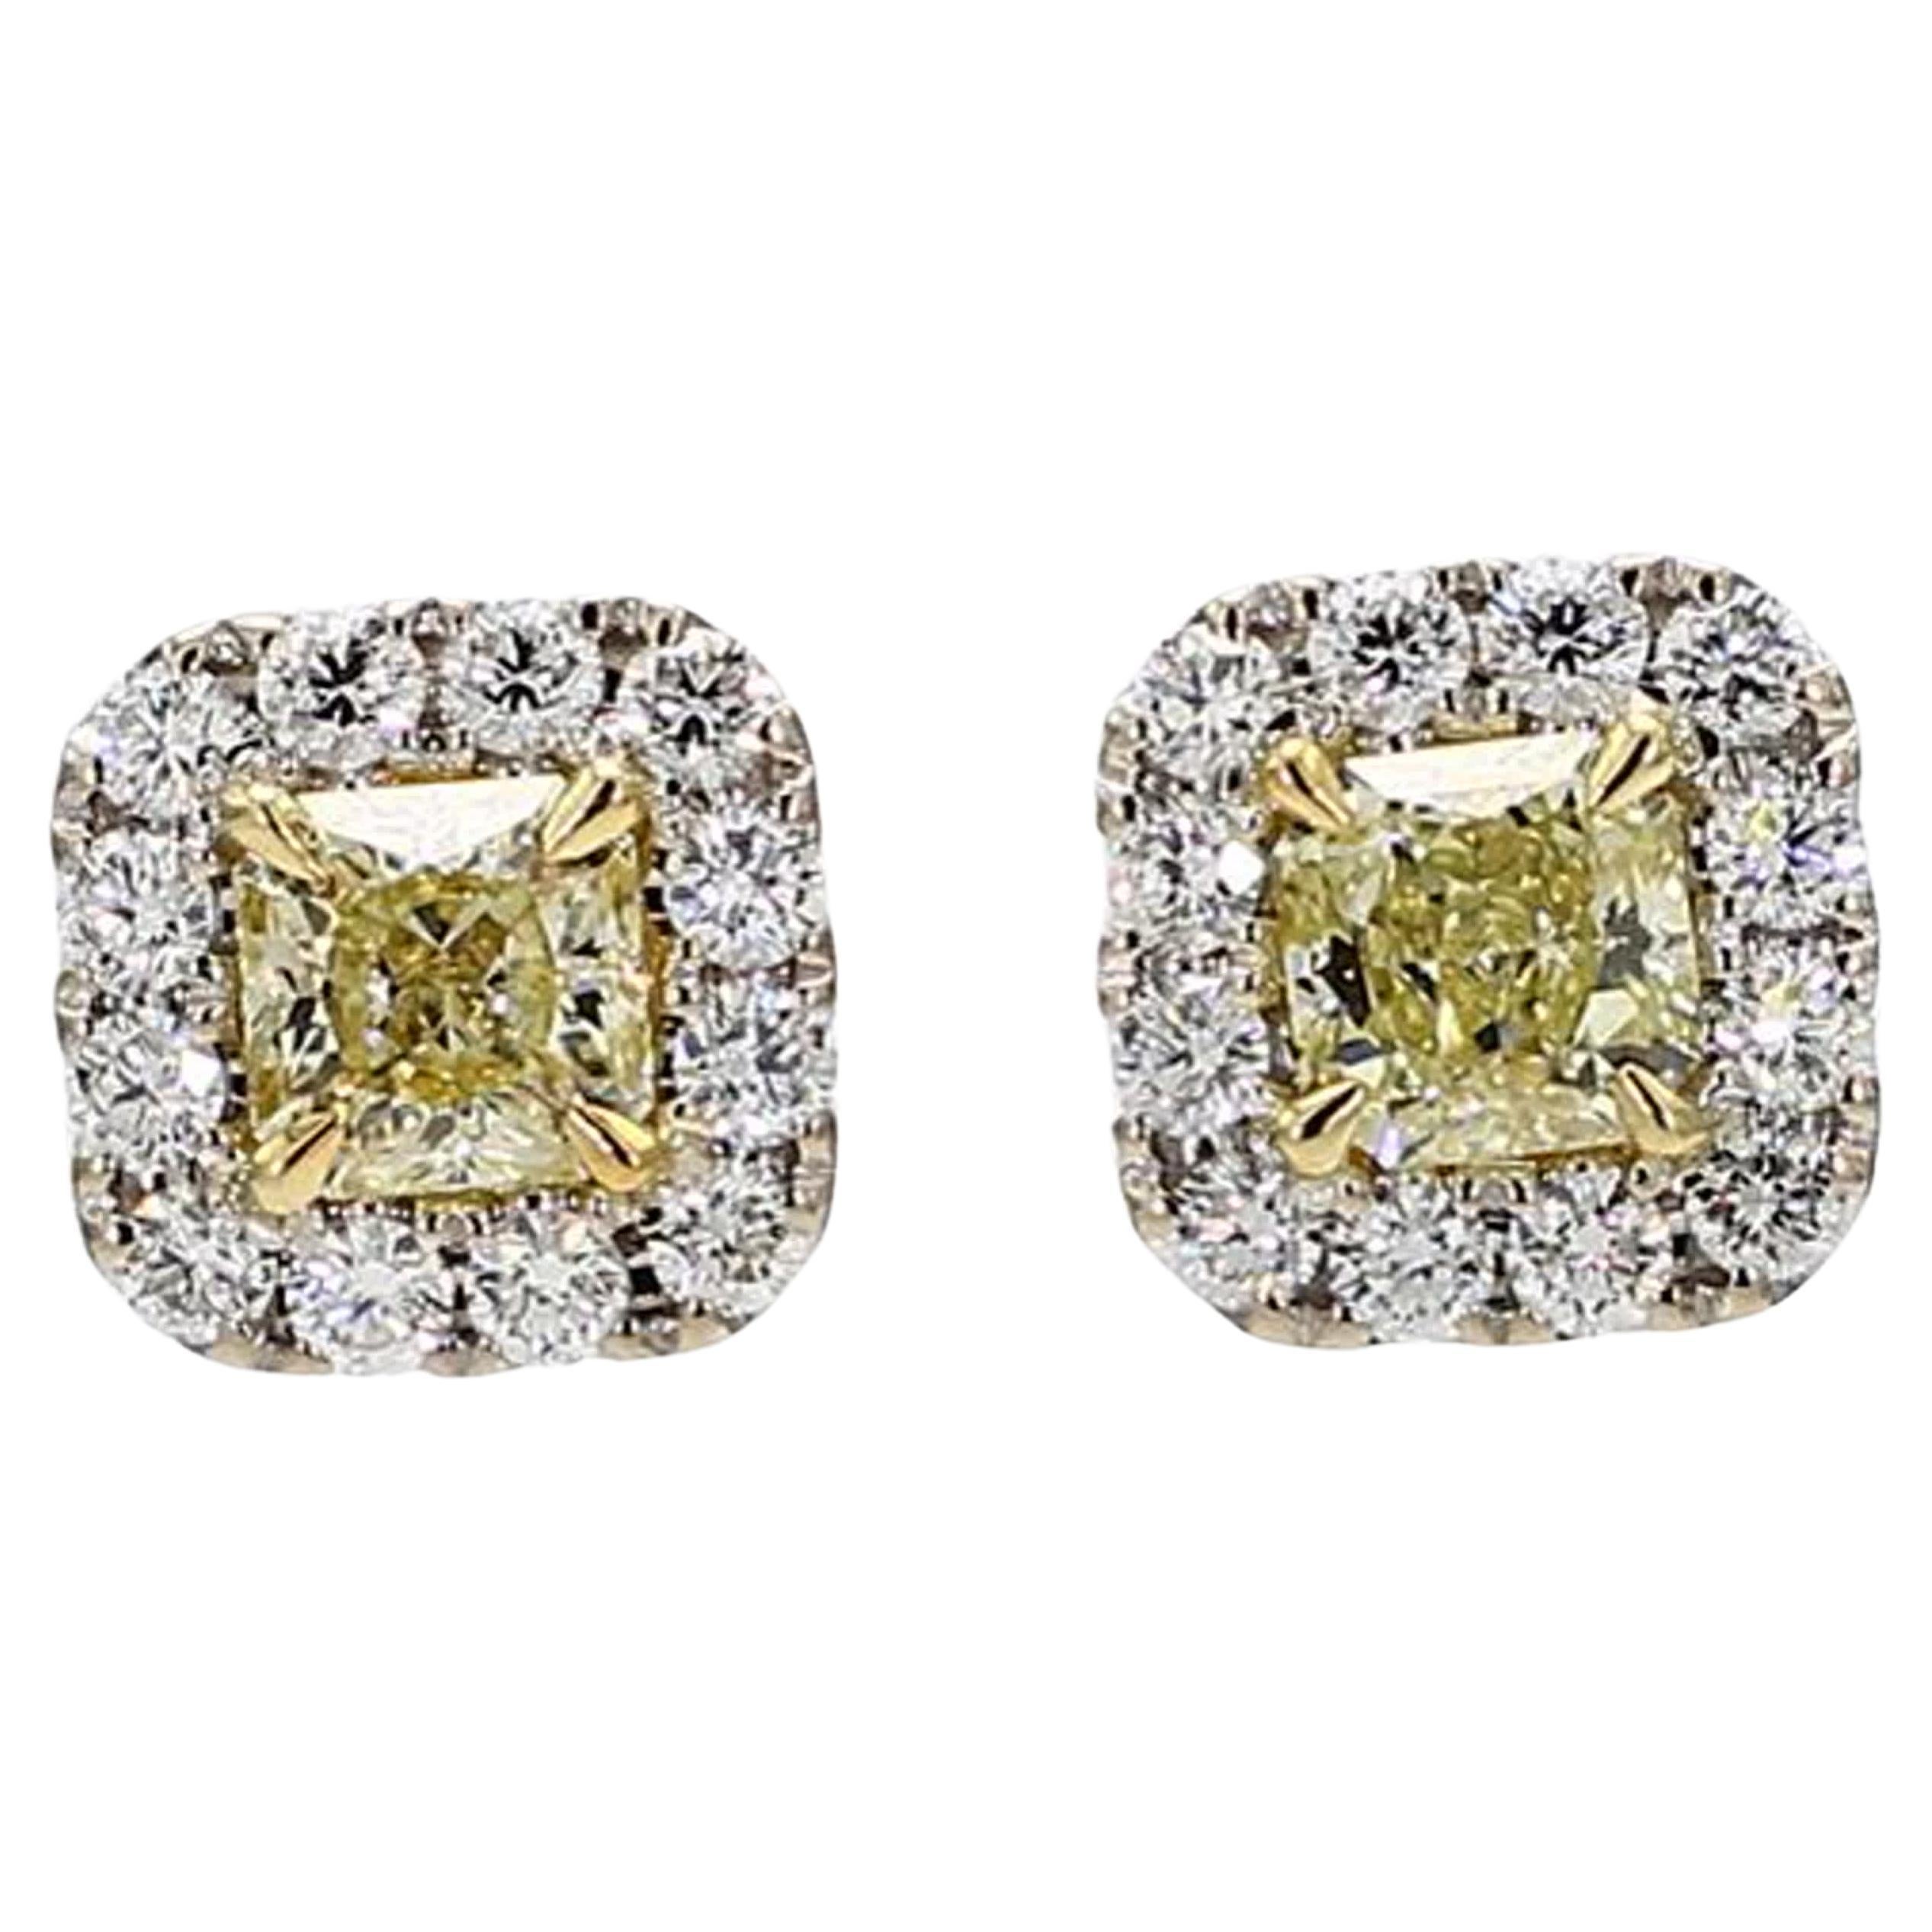 GIA Certified Natural Yellow Radiant Diamond 1.39 Carat TW Gold Stud Earrings (Boucles d'oreilles en or)